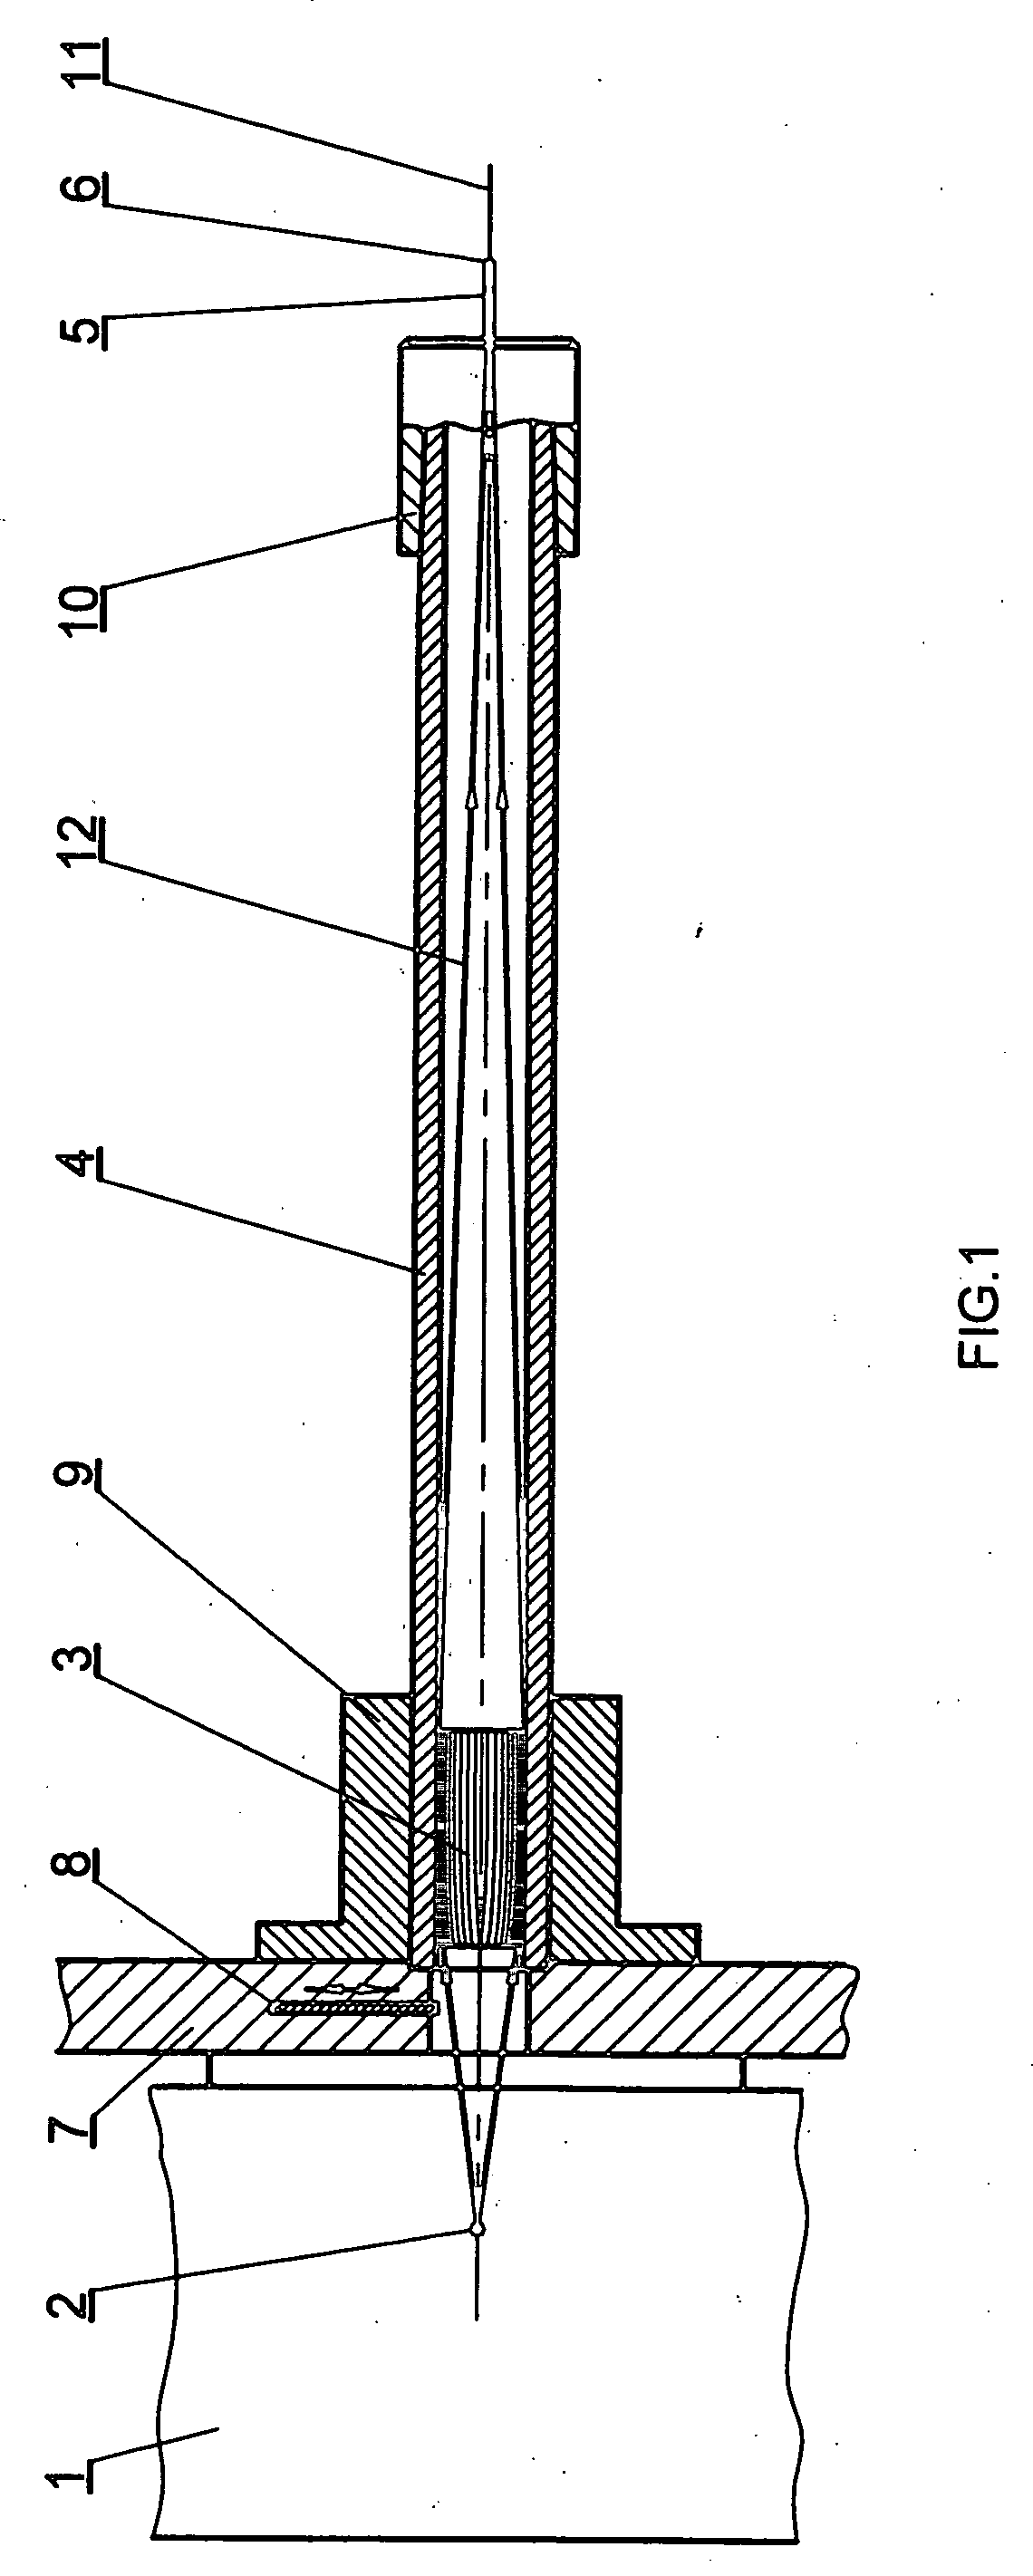 X-ray needle apparatus and method for radiation treatment